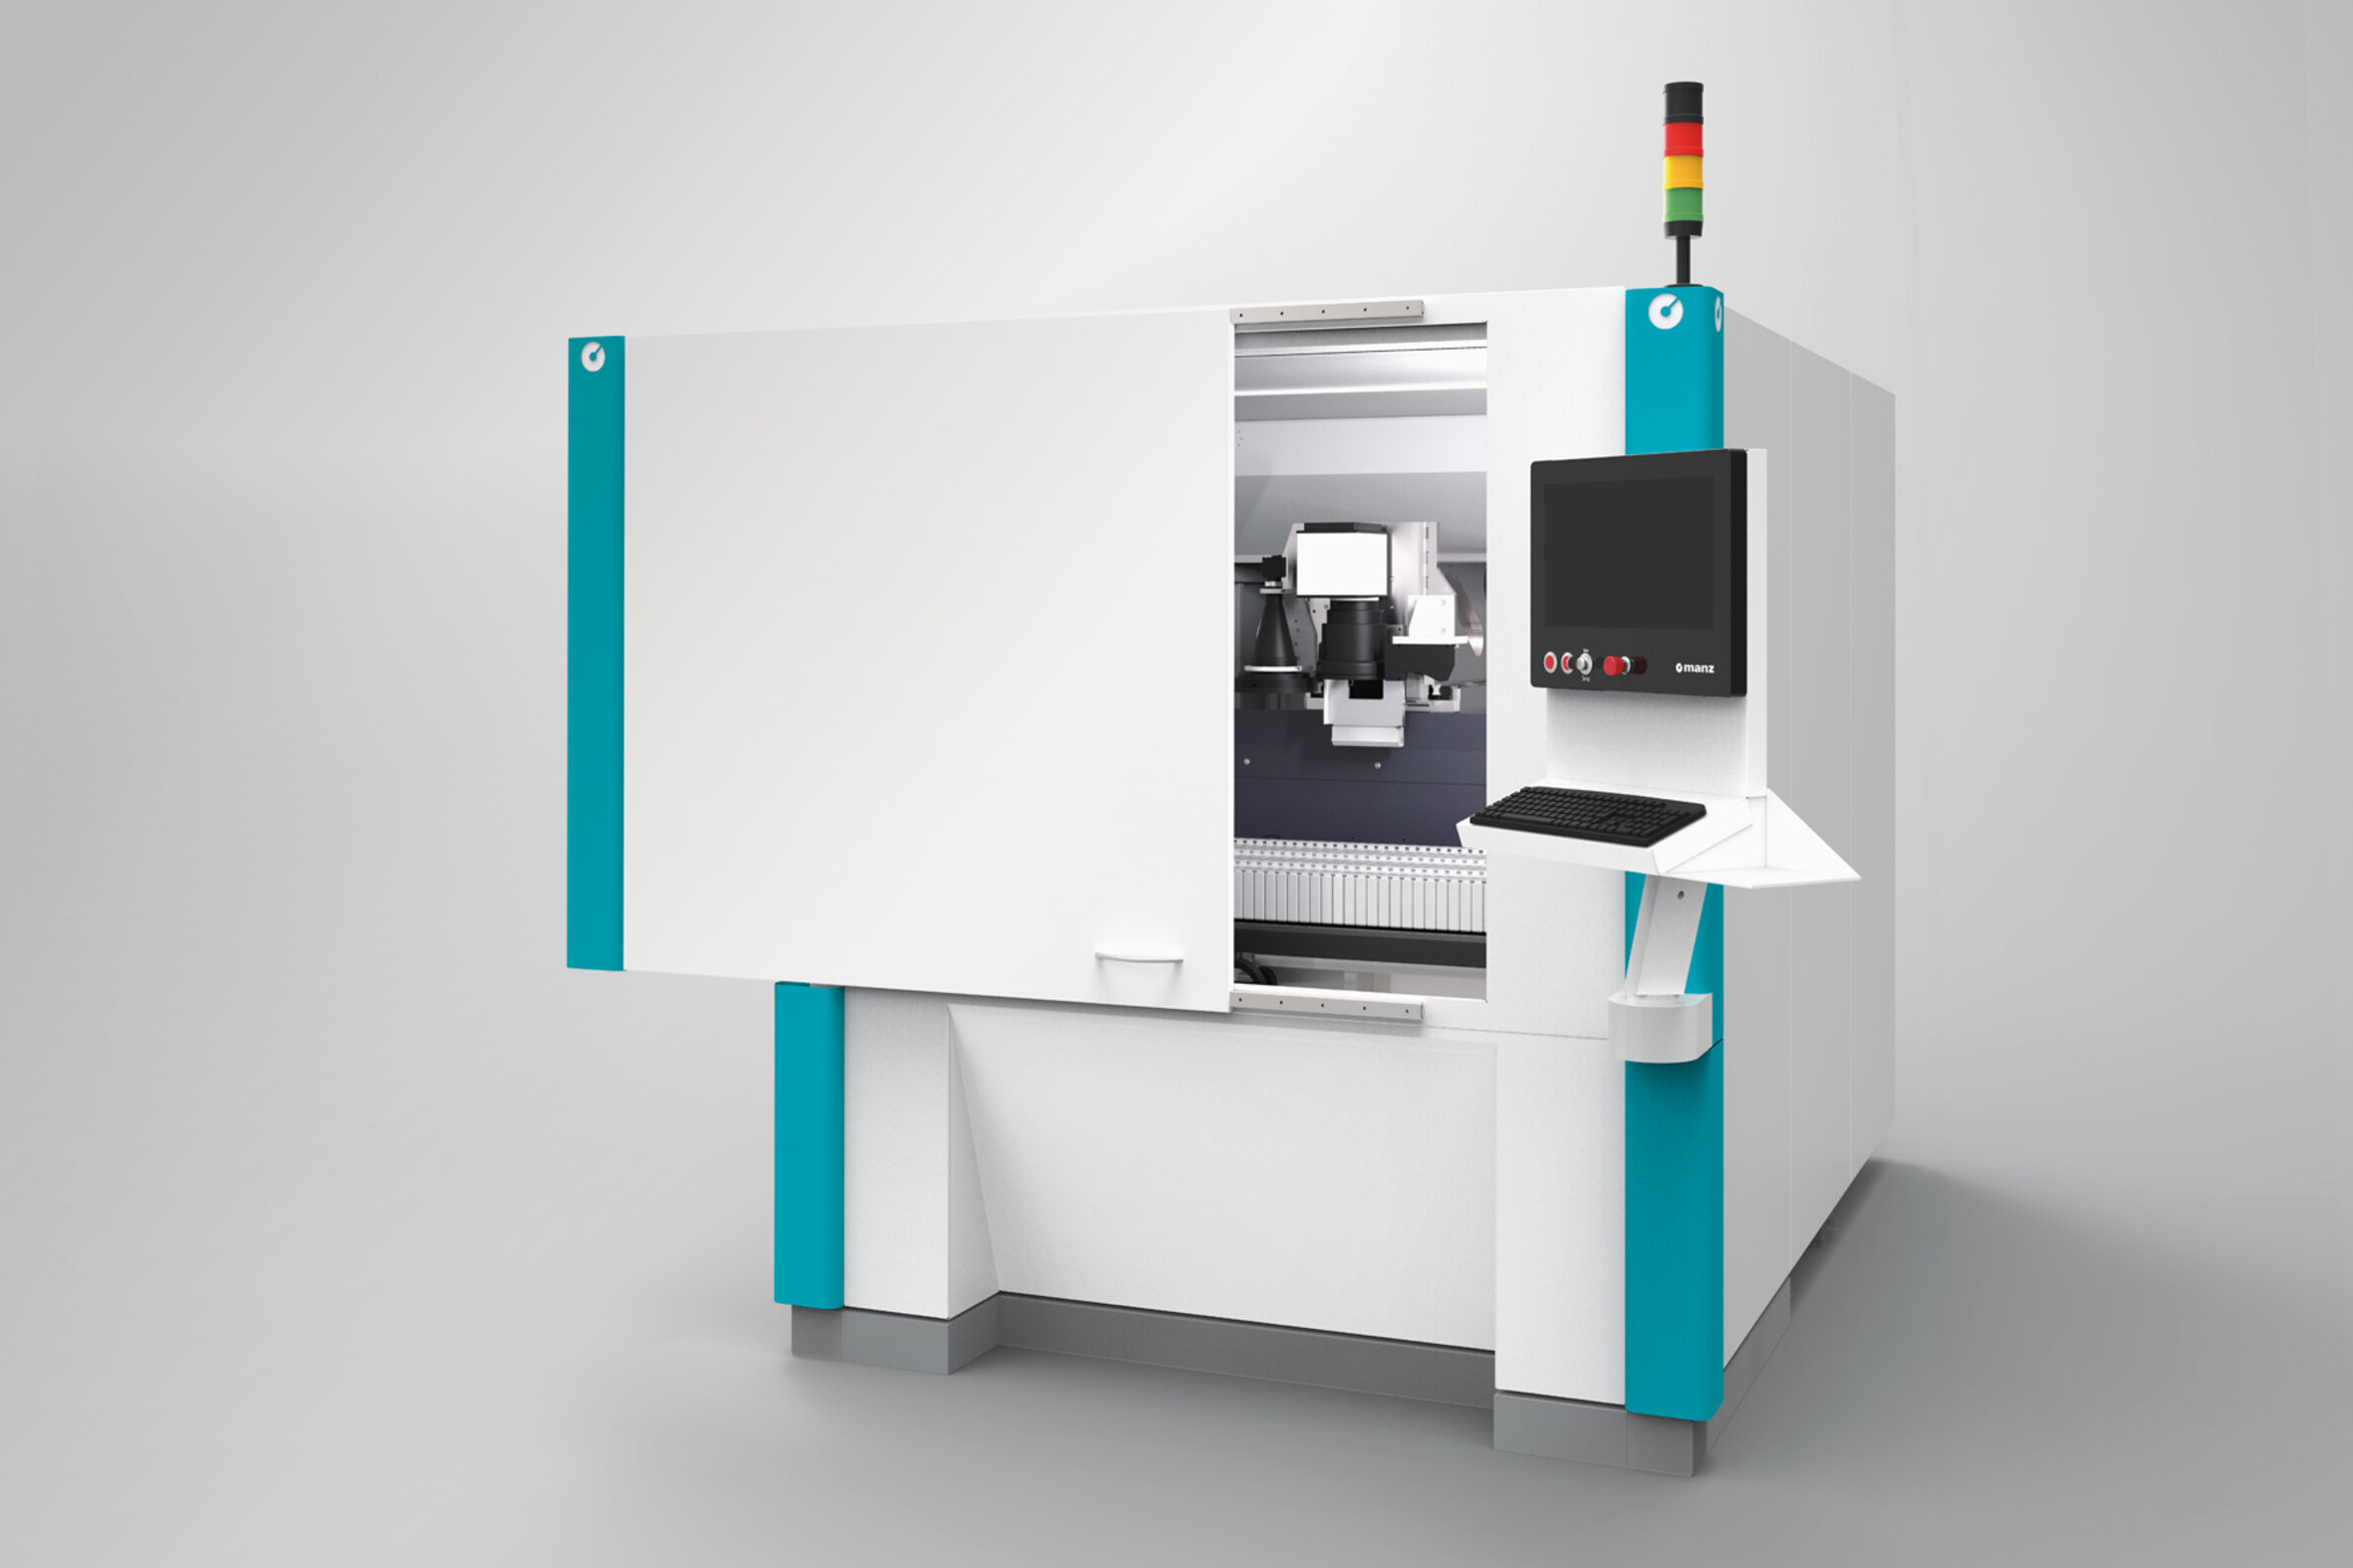 The BLS 500 from Manz AG for various laser processes